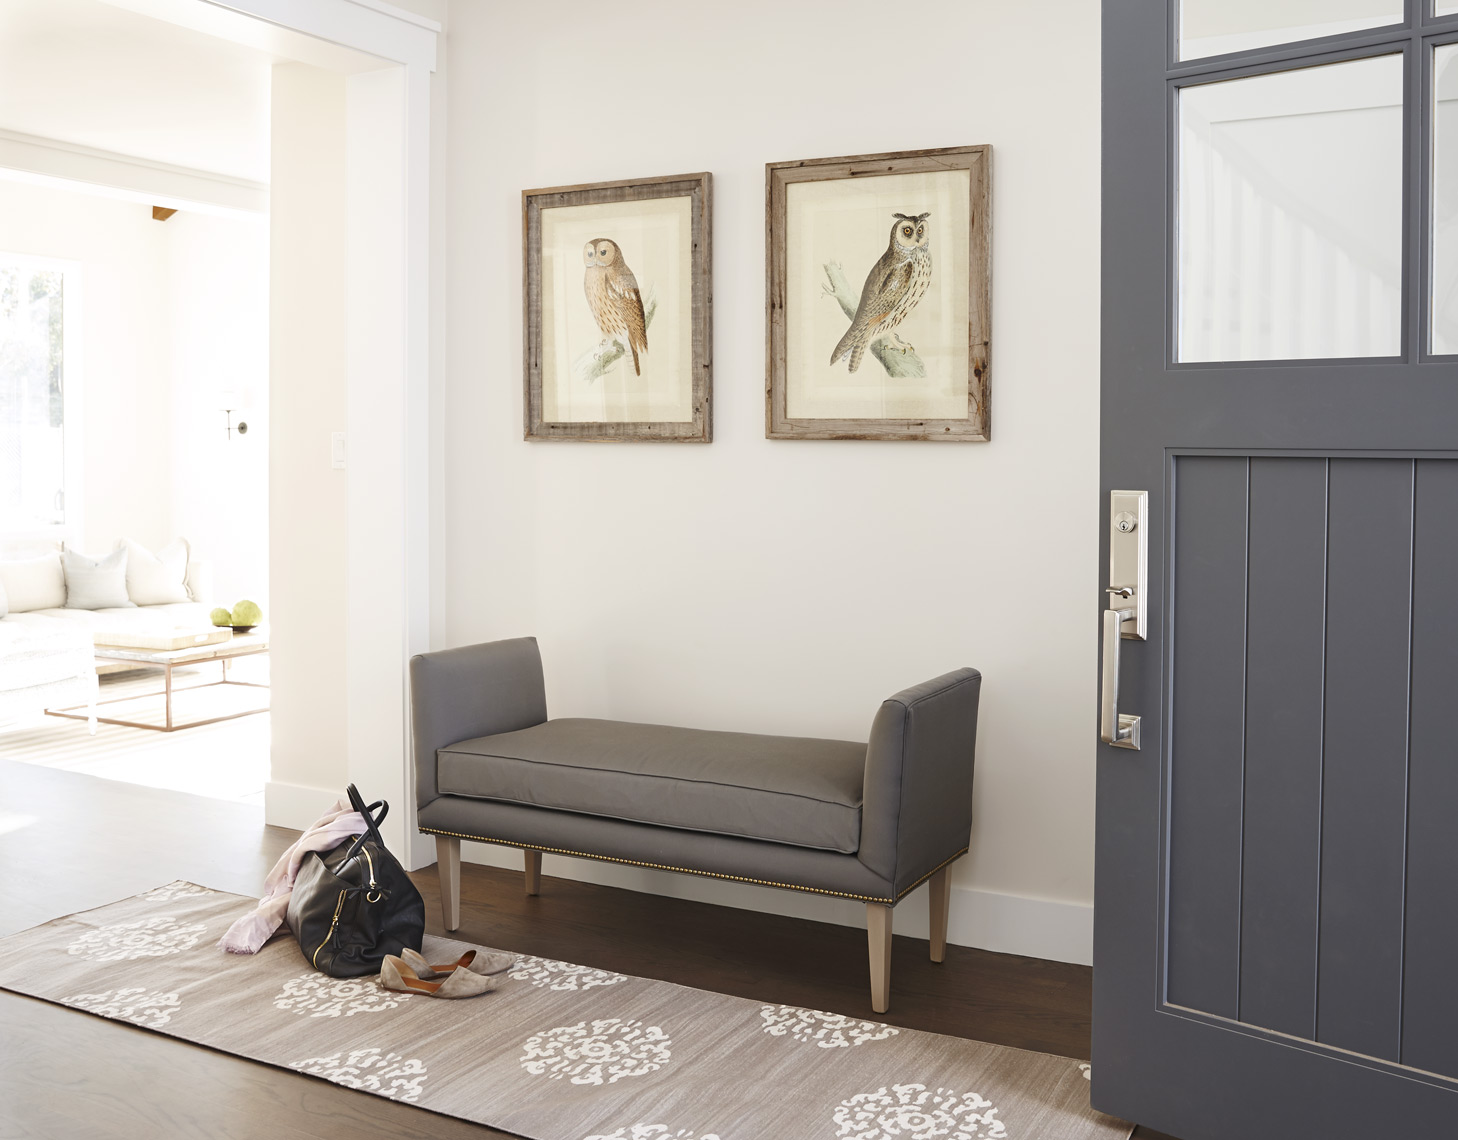 Entry way foyer with bench and framed art prints on wall